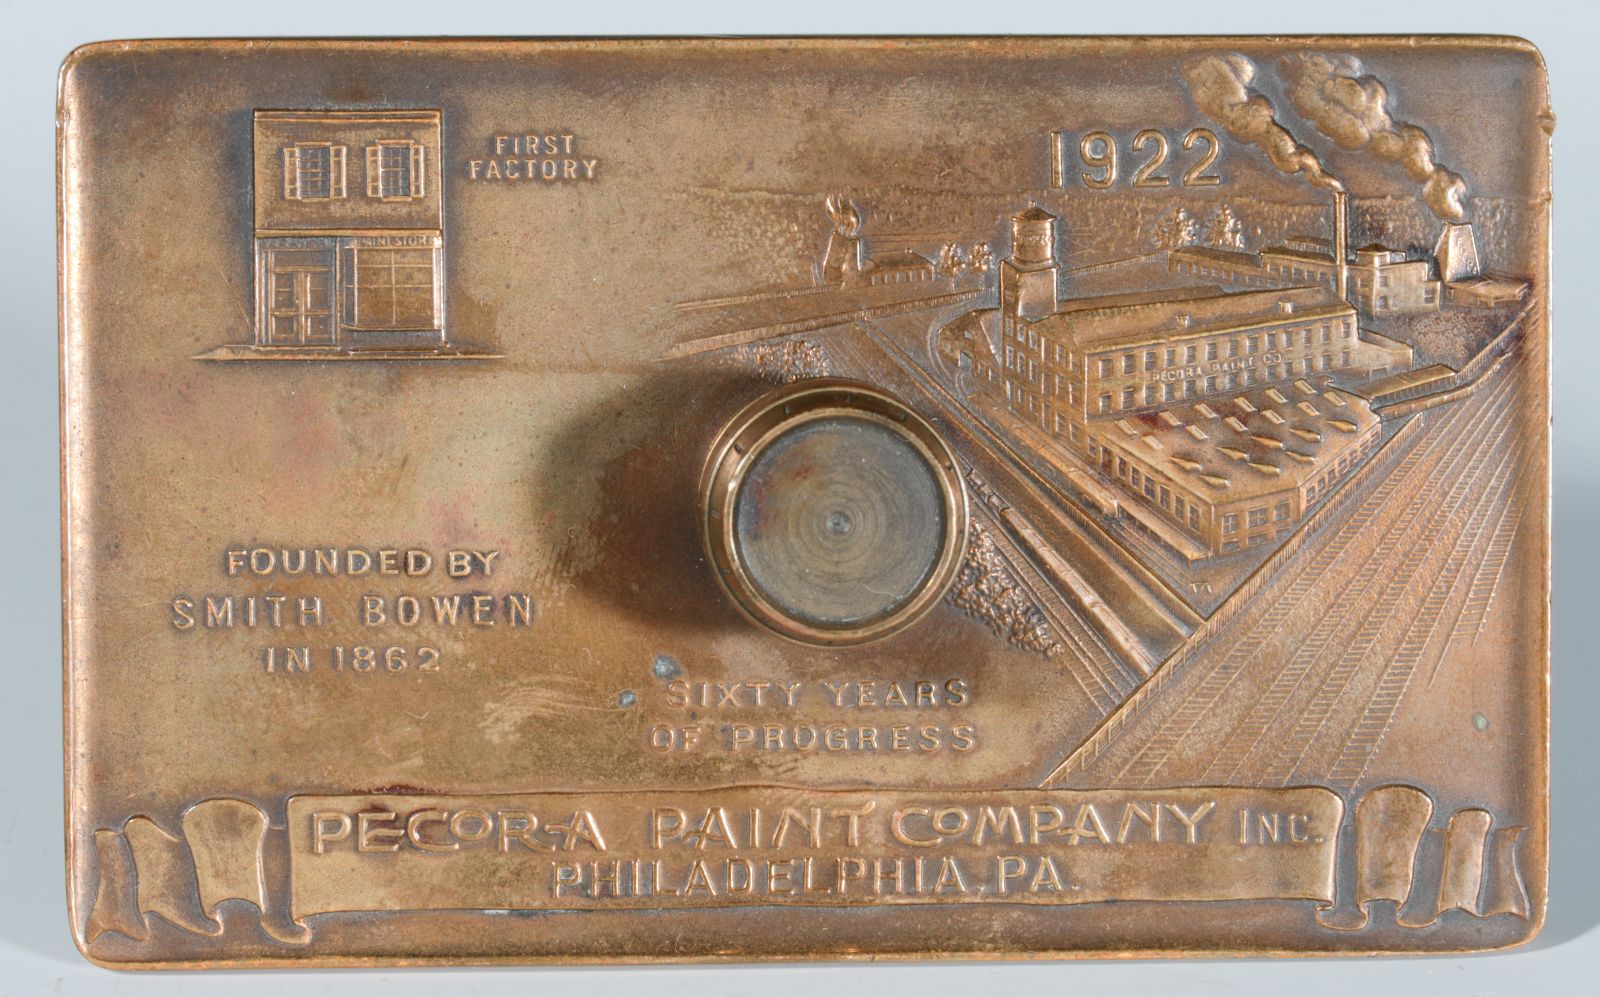 A 1922 PECORA PAINT CO. ADVERTISING PAPERWEIGHT